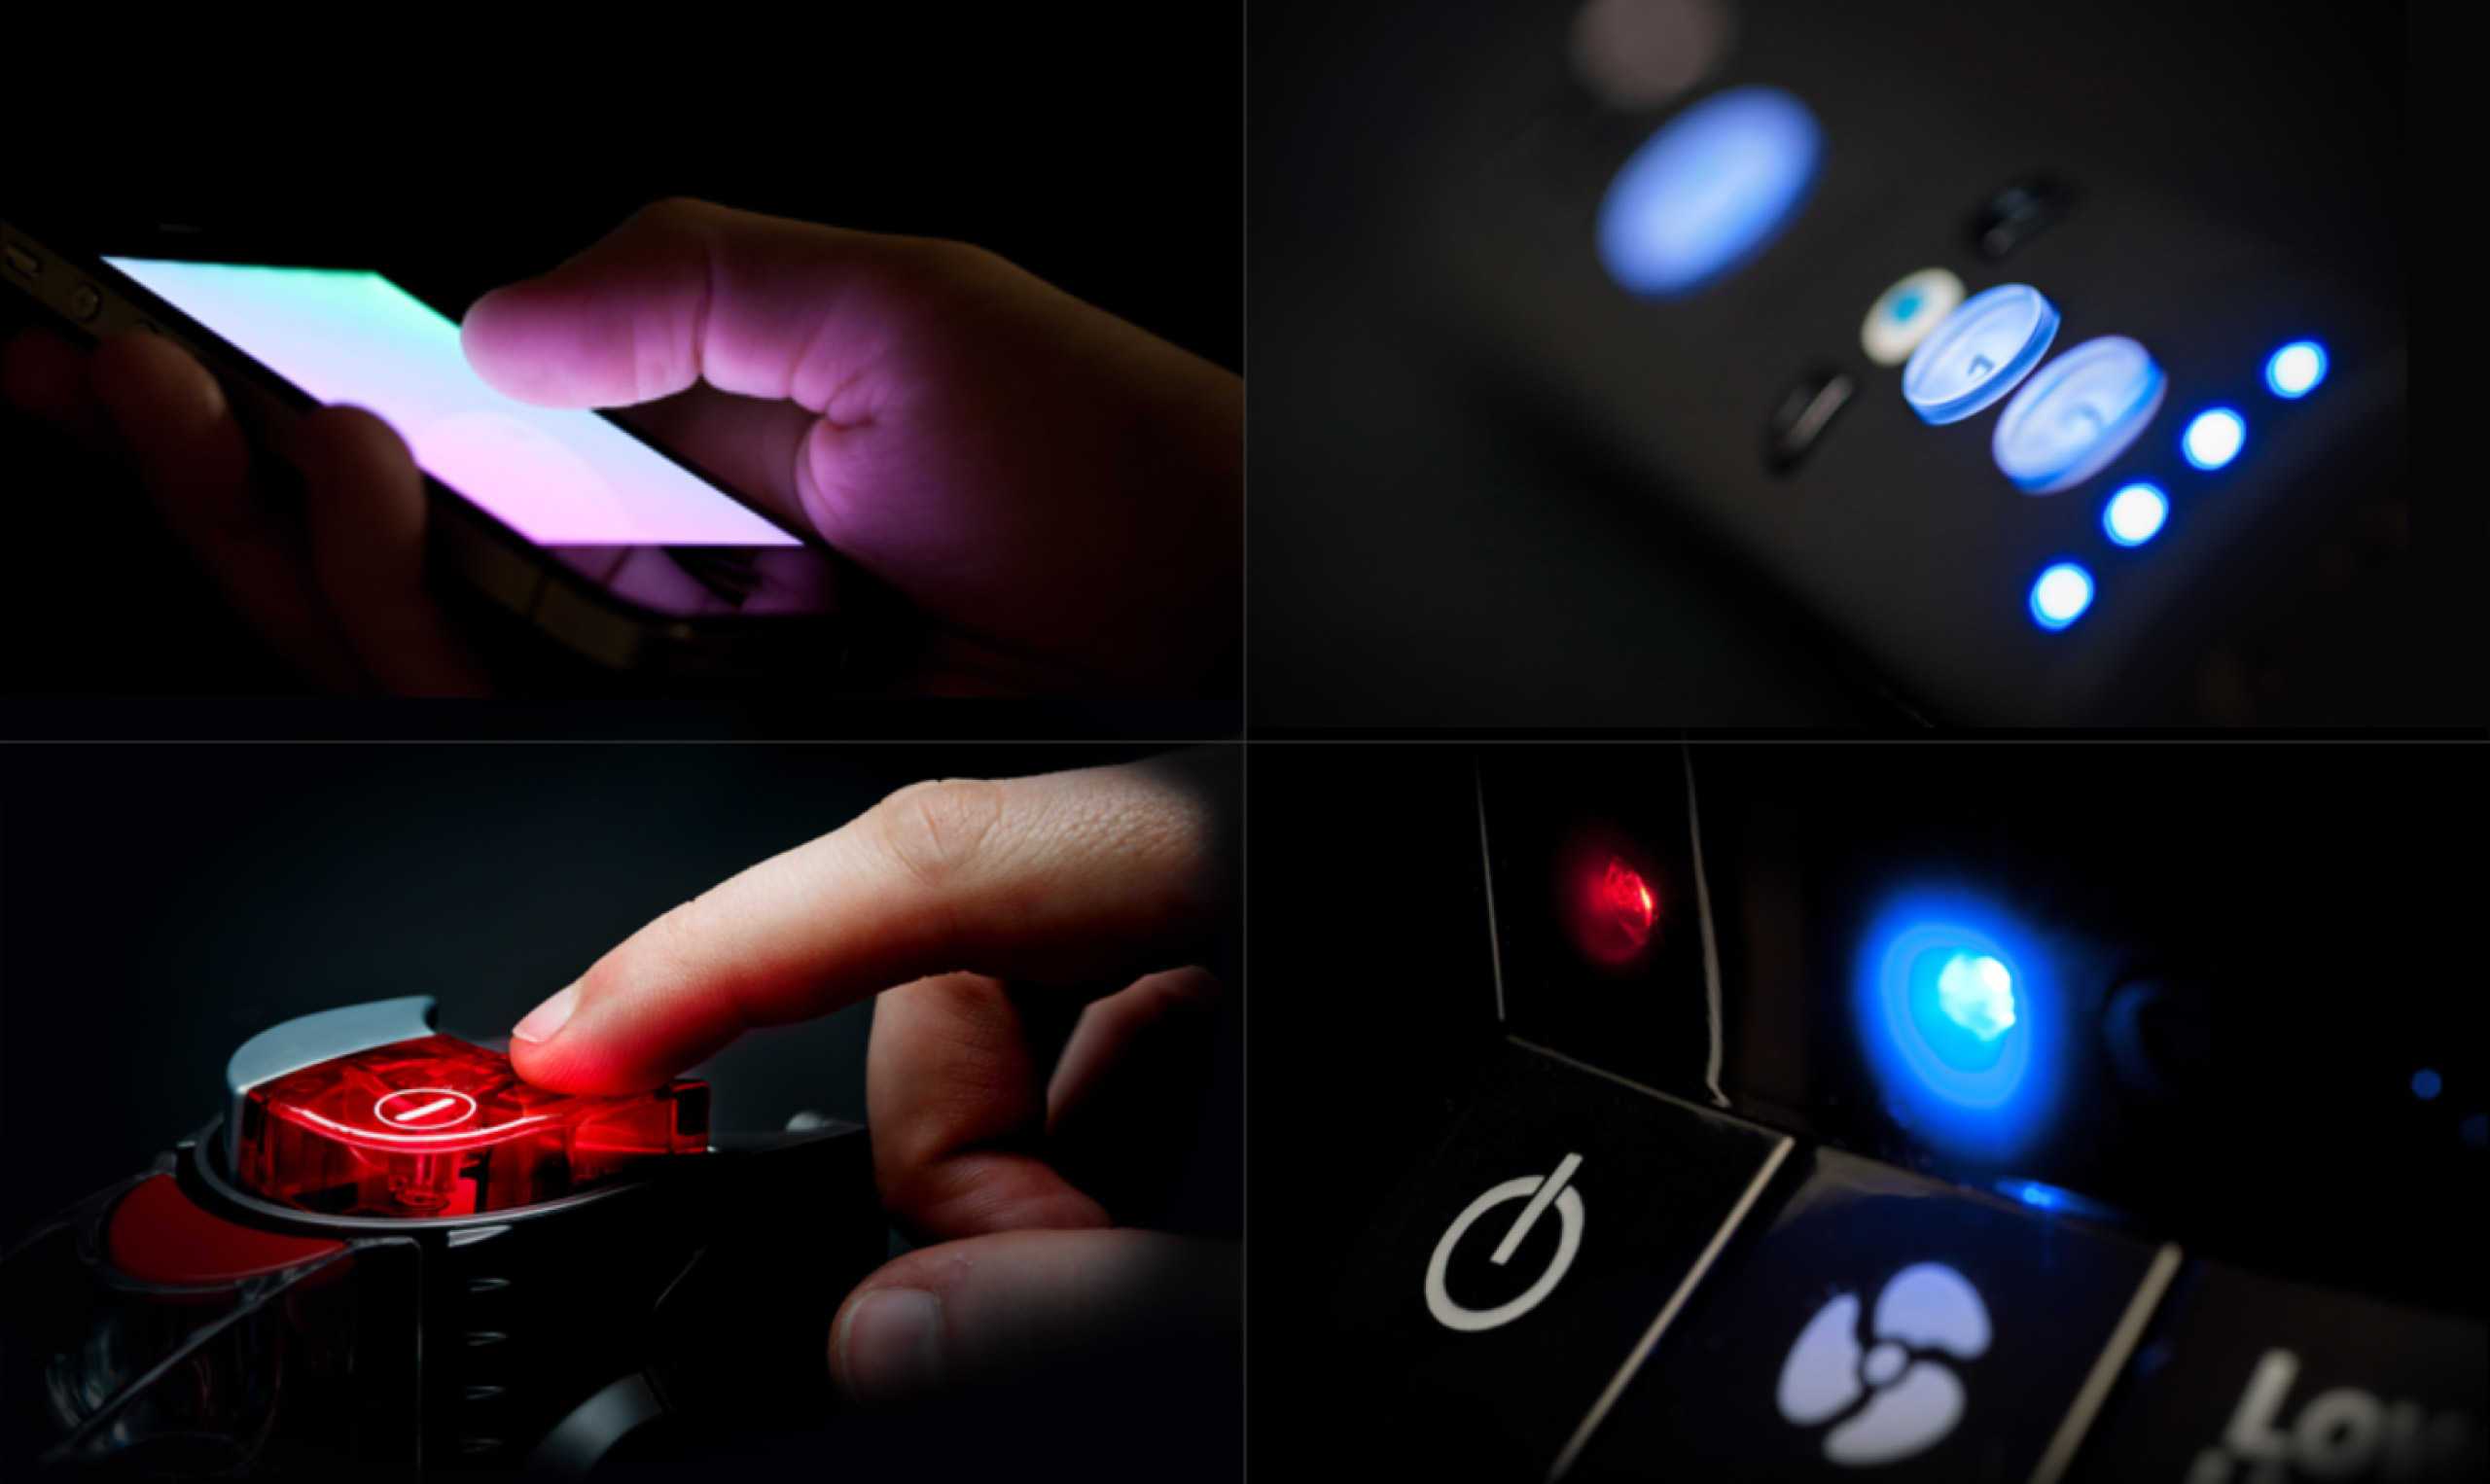 A series of photos showing different lights on a remote control.